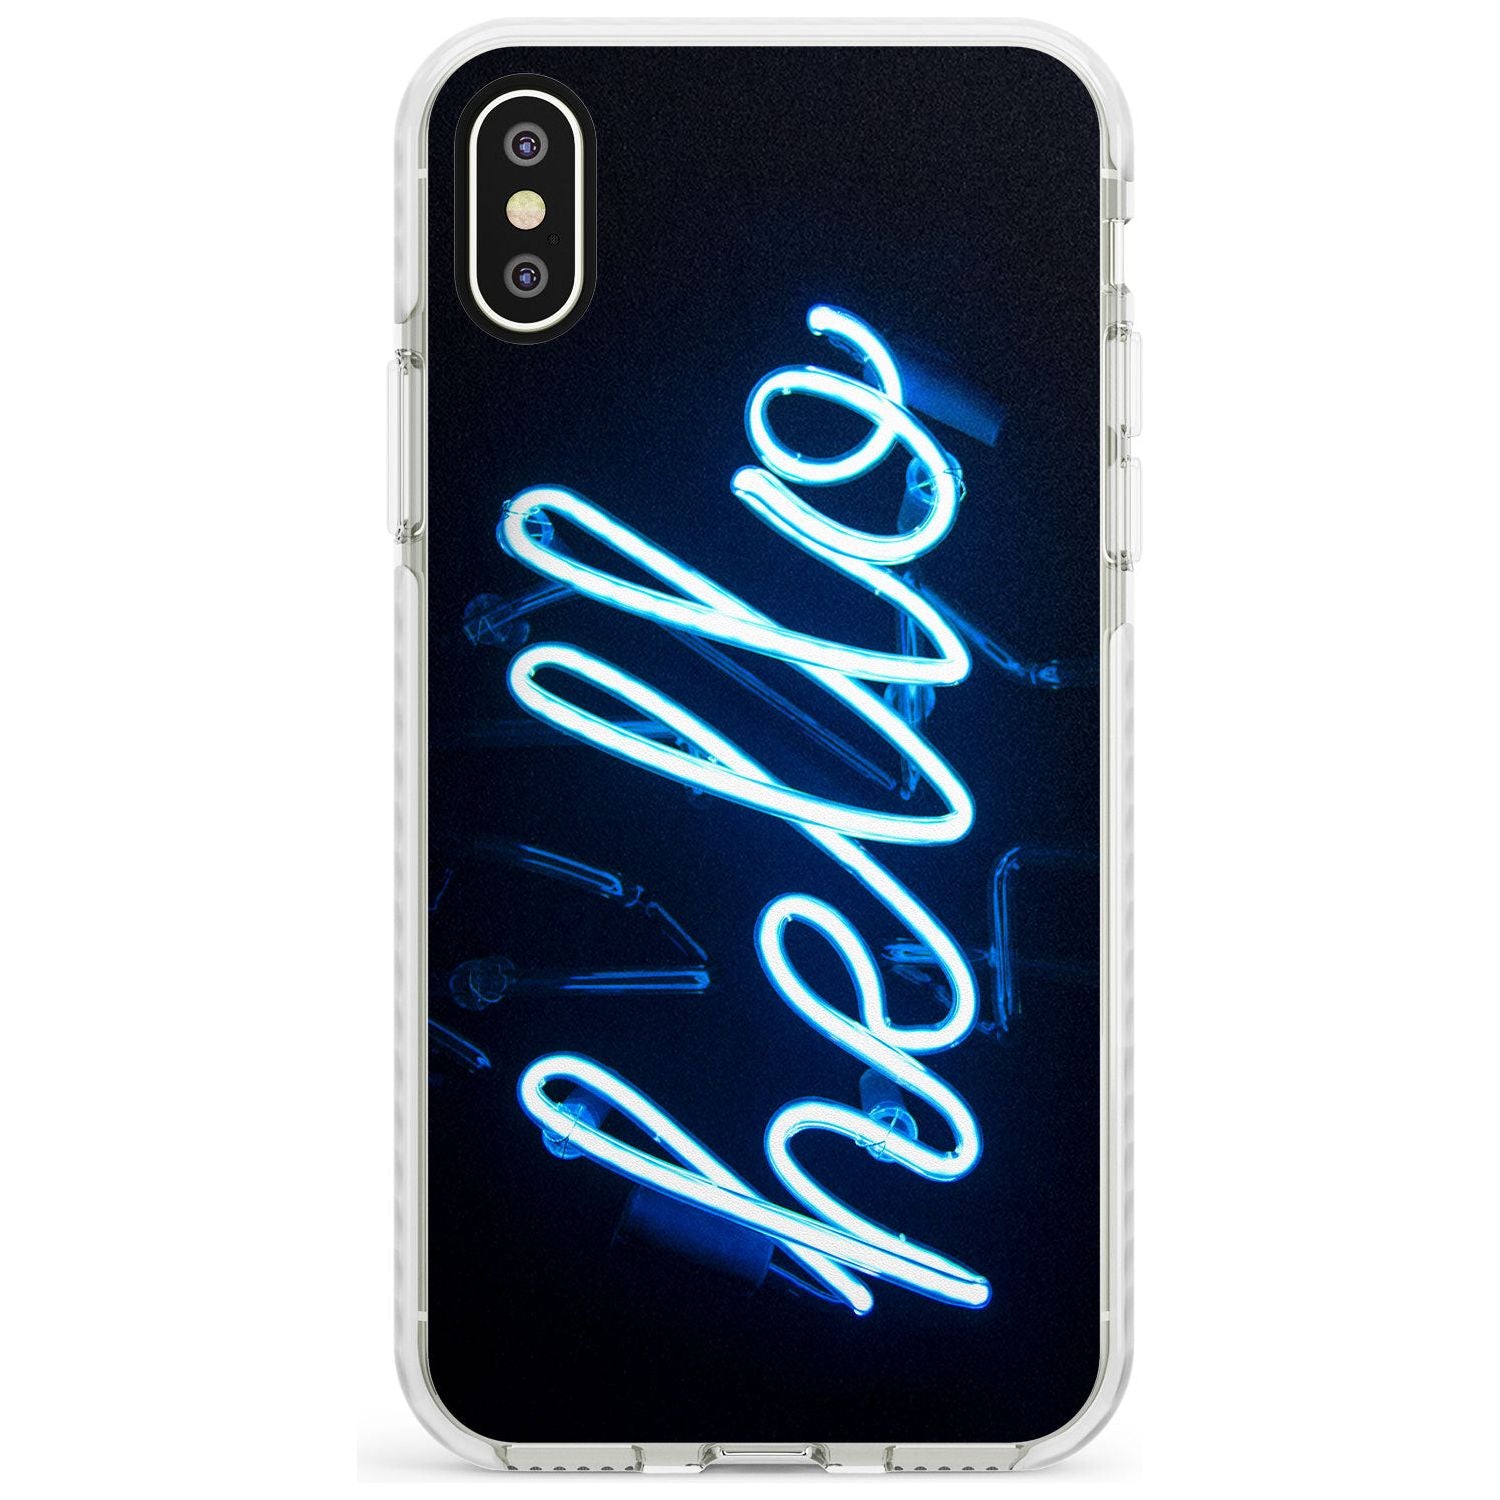 "Hello" Blue Cursive Neon Sign Impact Phone Case for iPhone X XS Max XR